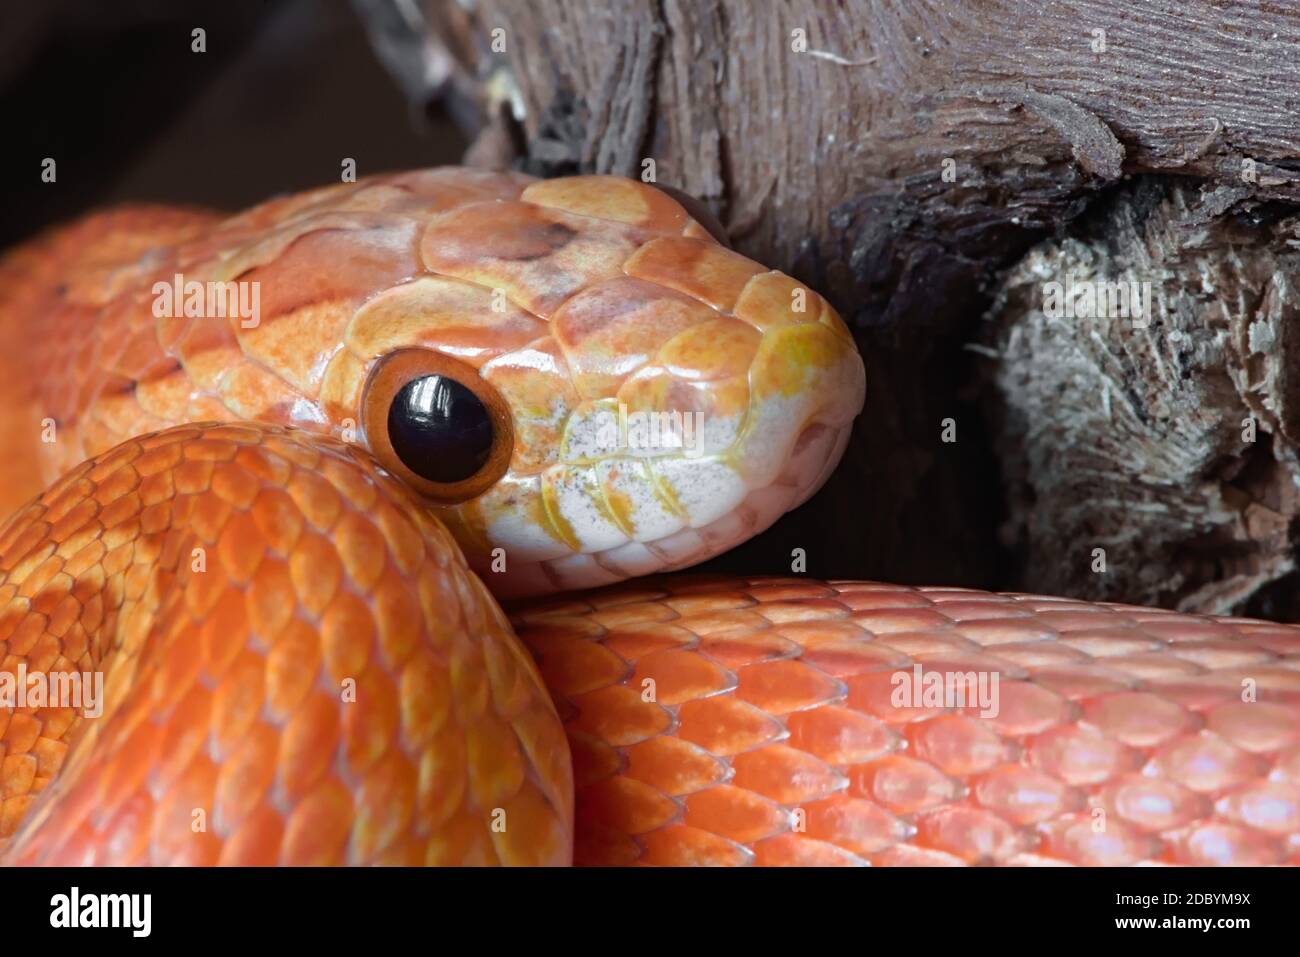 Super macro close up of young juvenile pet corn snake poking face out from vibrantly colored coils. Dark plain background with great detail. Stock Photo